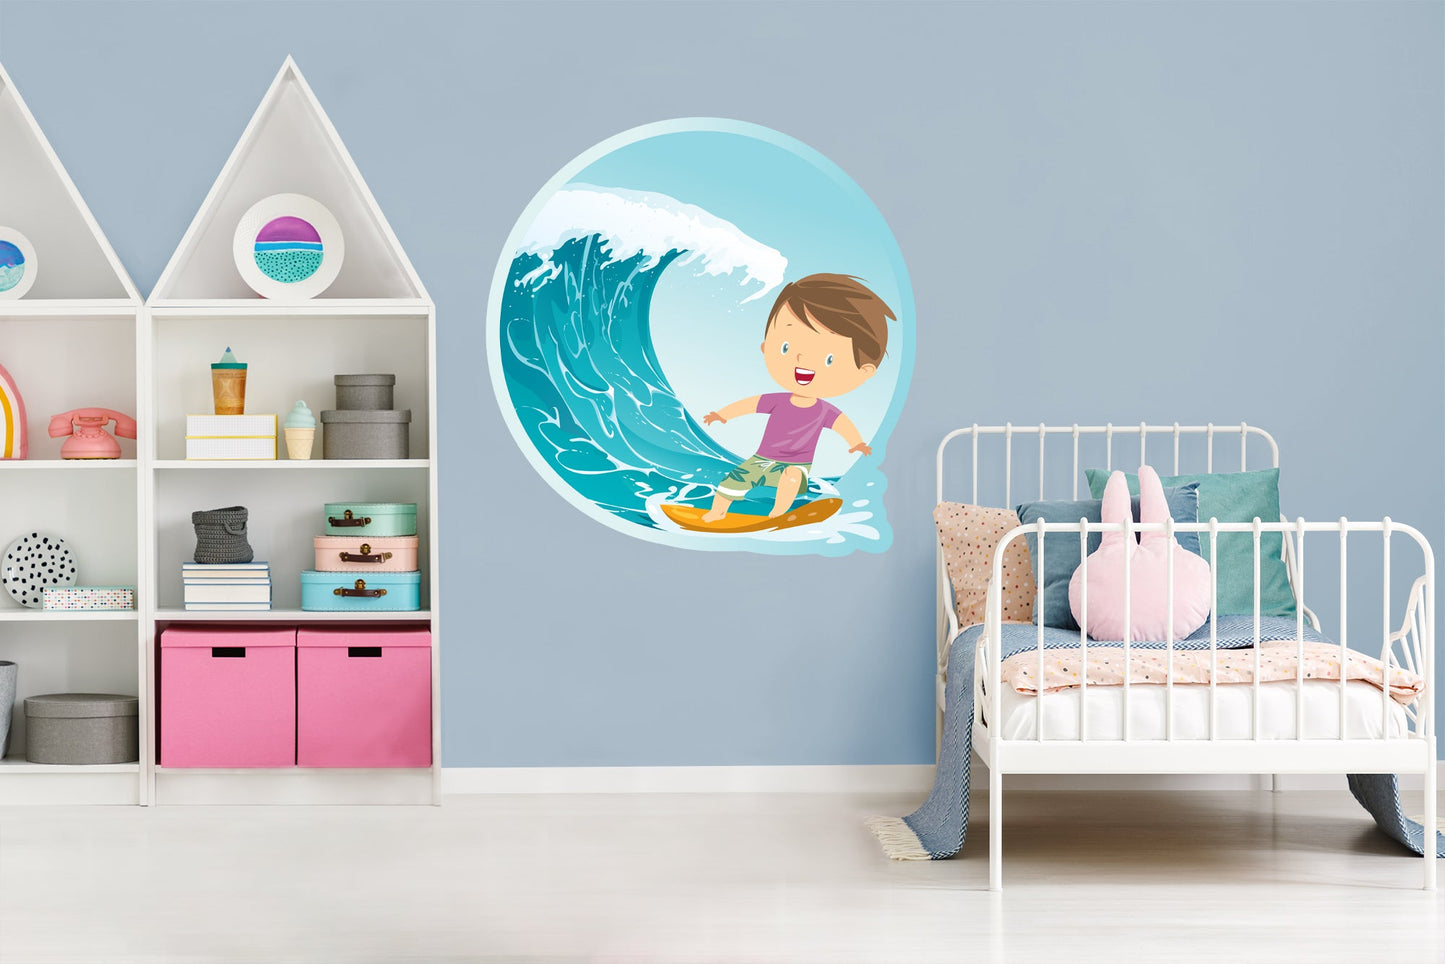 Nursery:  Wave Icon        -   Removable Wall   Adhesive Decal